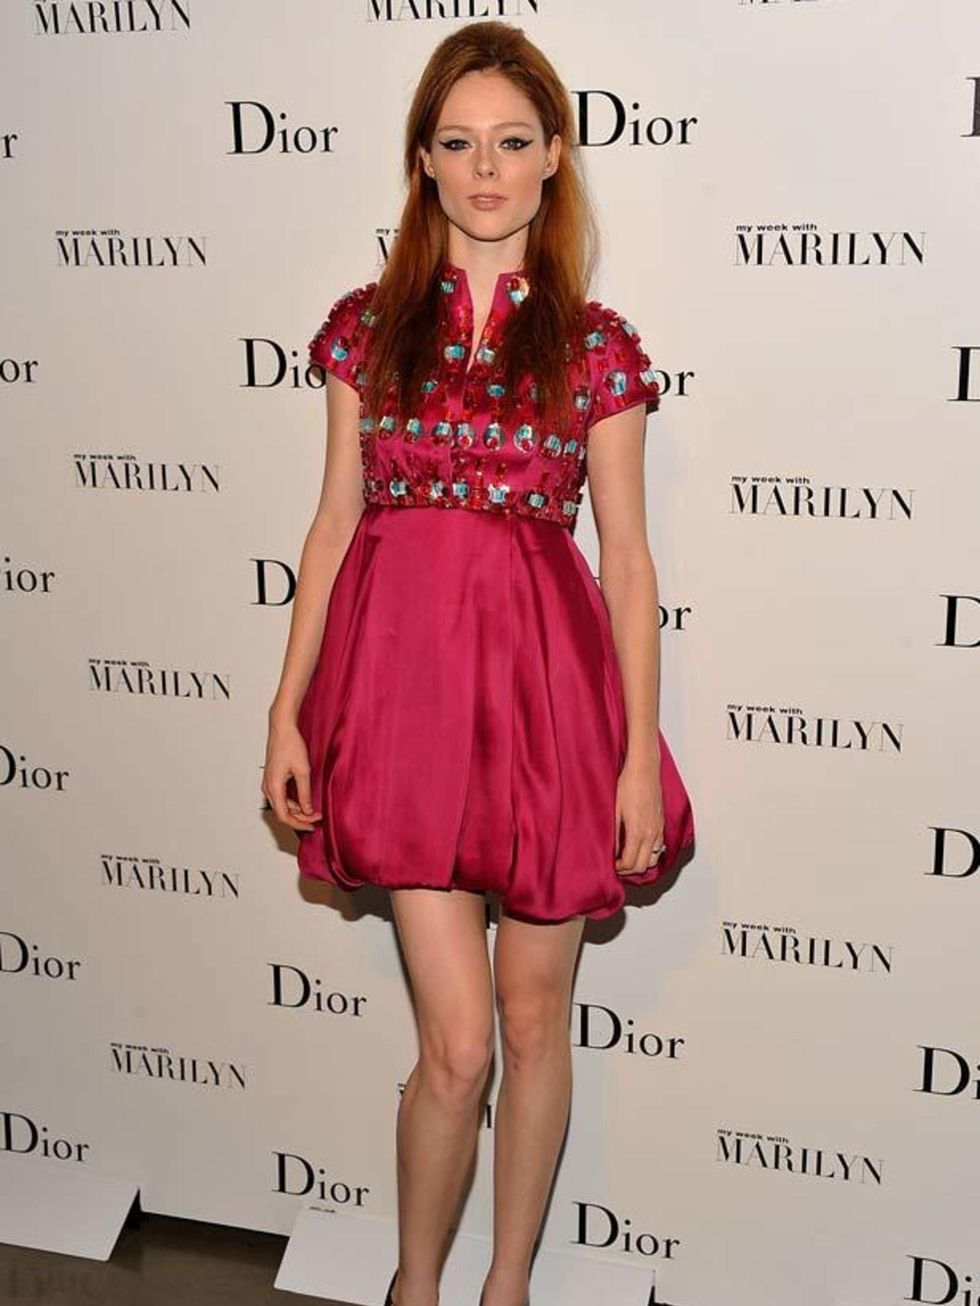 <p><a href="http://www.elleuk.com/starstyle/style-files/(section)/coco-rocha">Coco Rocha</a> wearing <a href="http://www.elleuk.com/catwalk/collections/dior/">Dior</a> at the opening of the Picturing Marilyn exhibition at the Milk Gallery in New York Ci